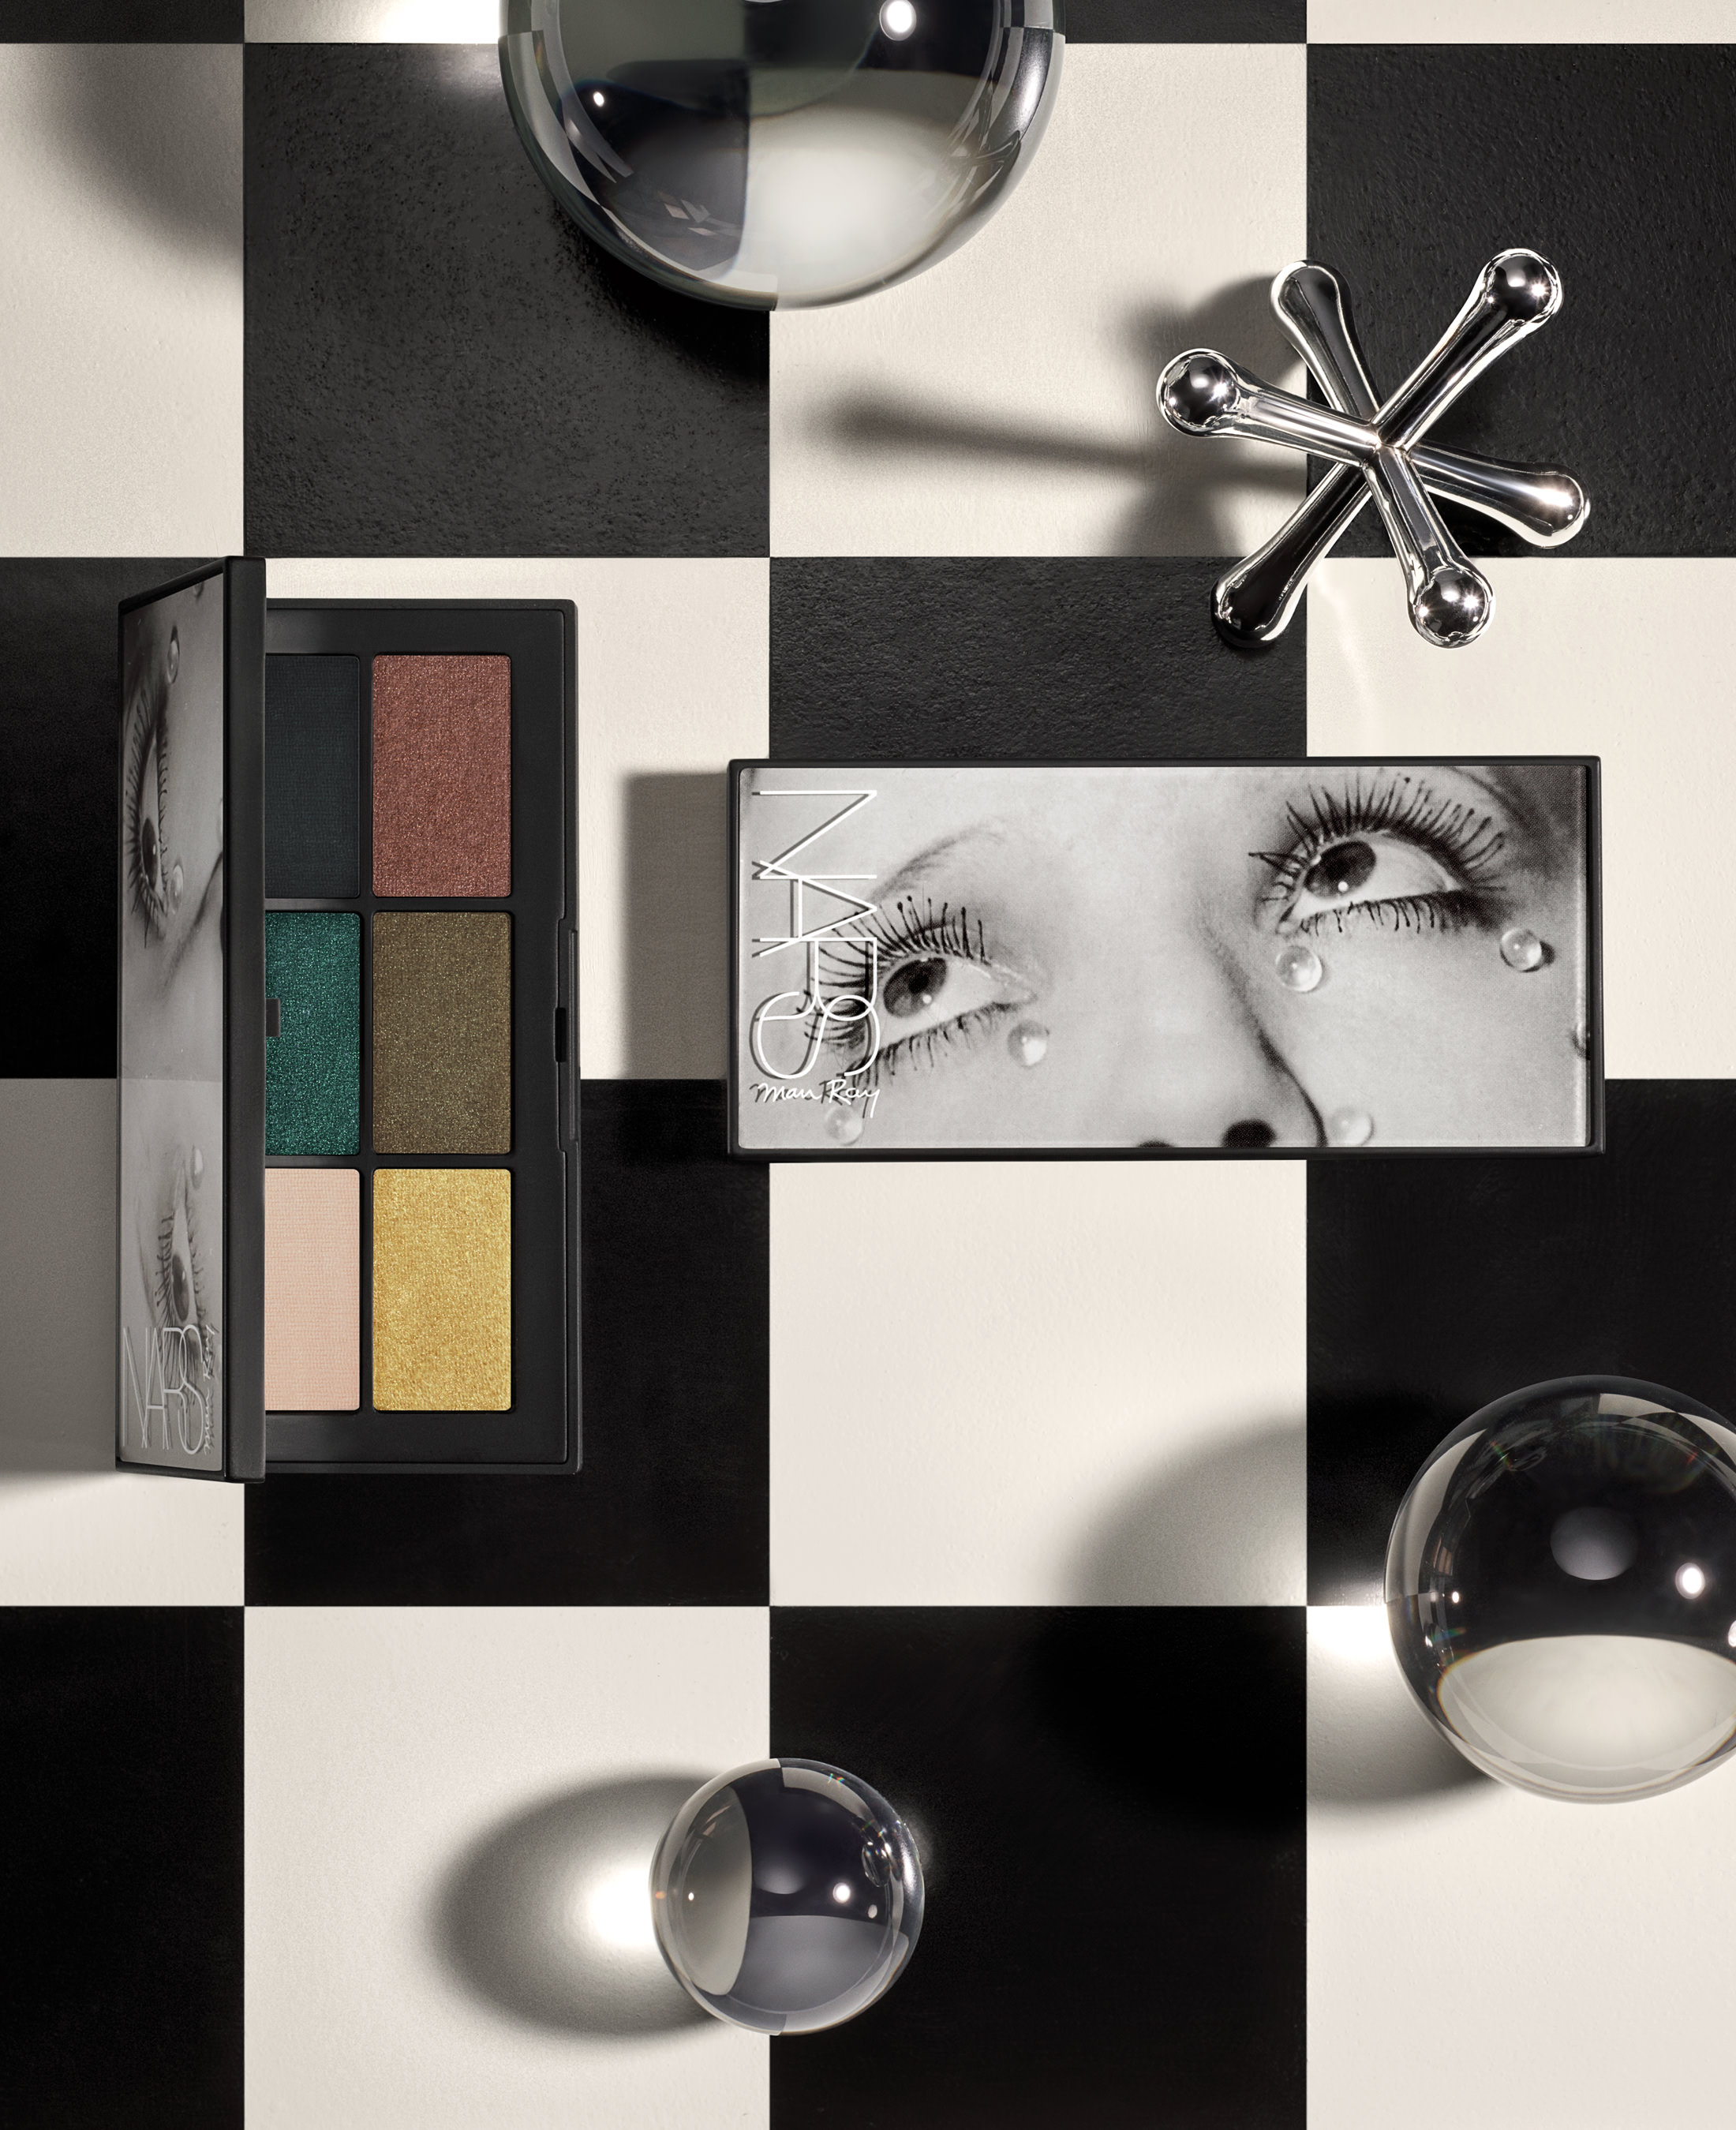 Man Ray for Nars Holiday Collection